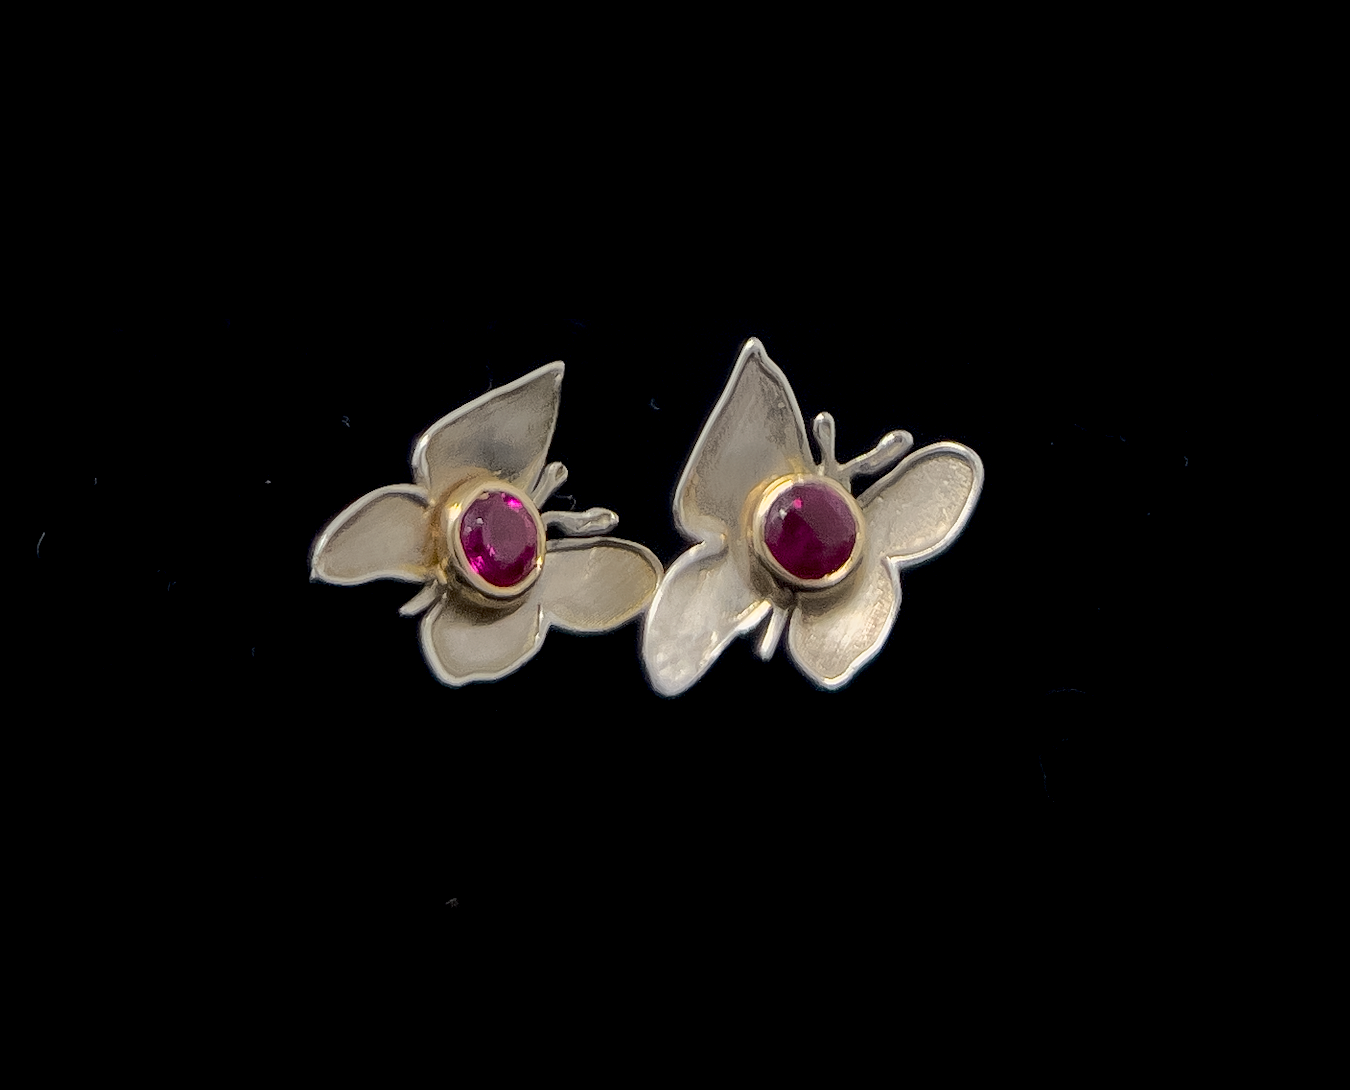 Make My Heart Flutter — Satin Brushed Solid Sterling Silver Butterfly Earrings with Solid 10k Gold Bezels and 4mm Ruby Centers